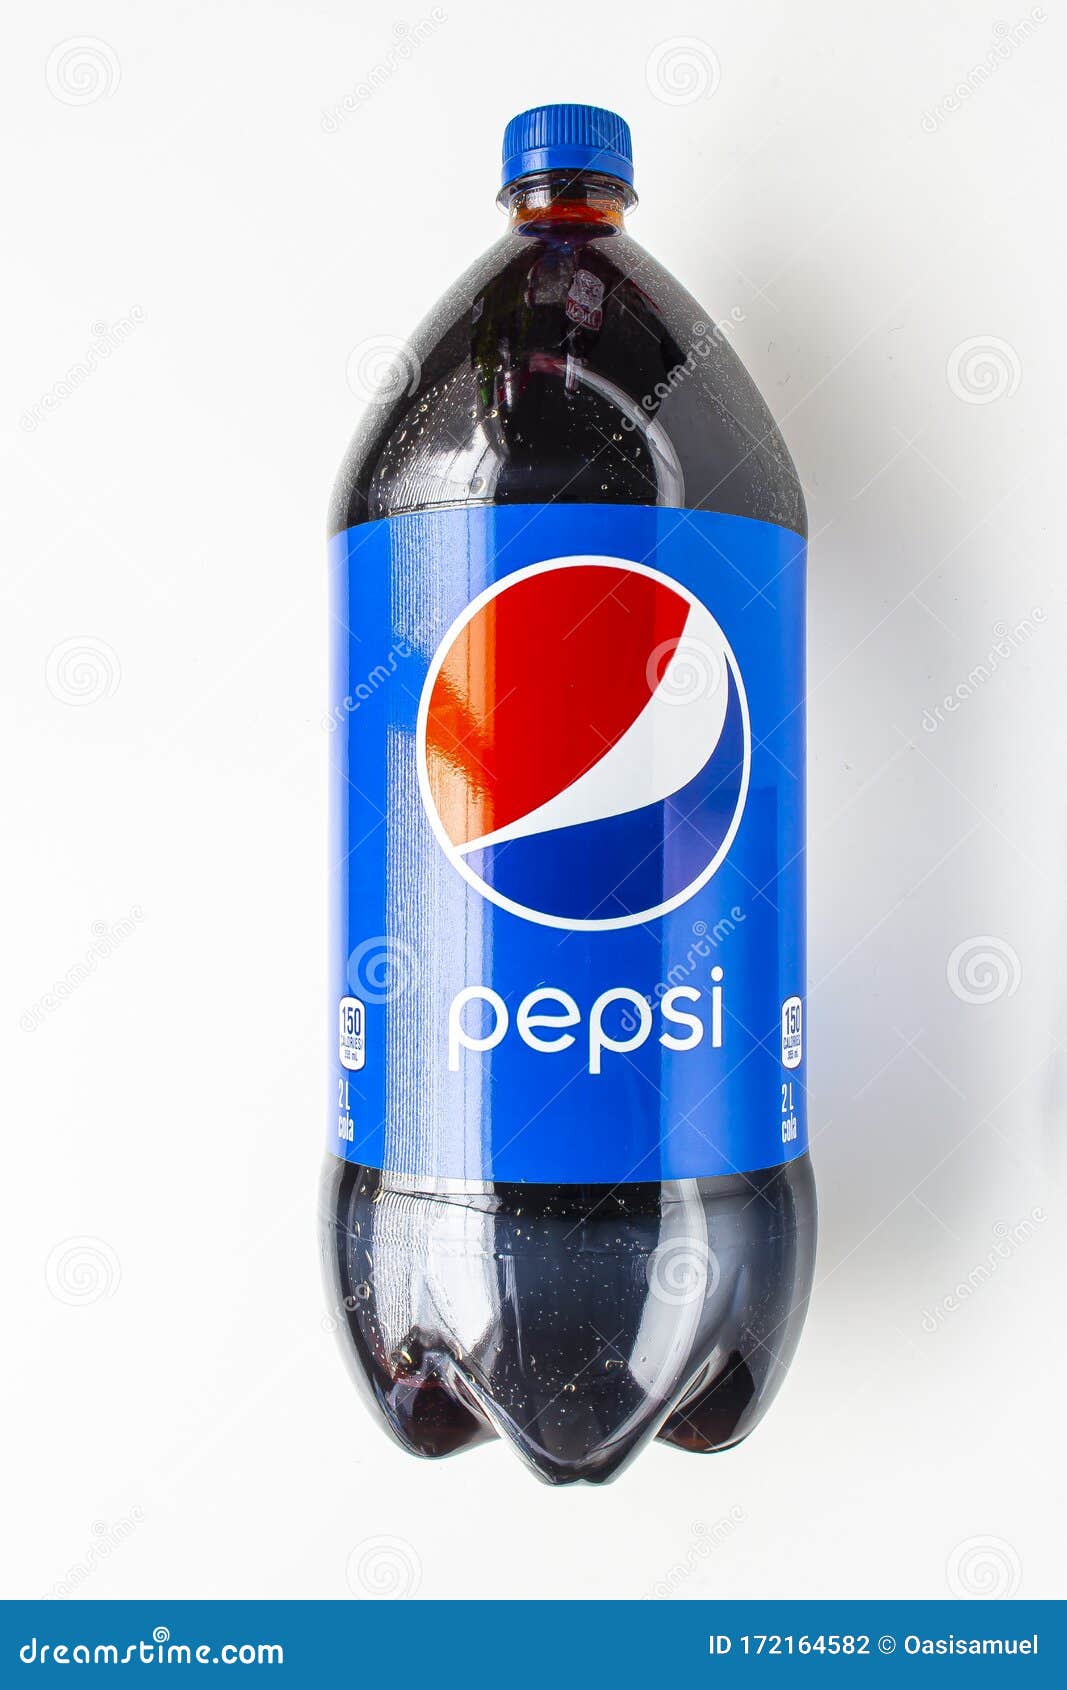 Pepsi Soda Two Liter Bottle. Carbonated Soft Drink Editorial Image ...